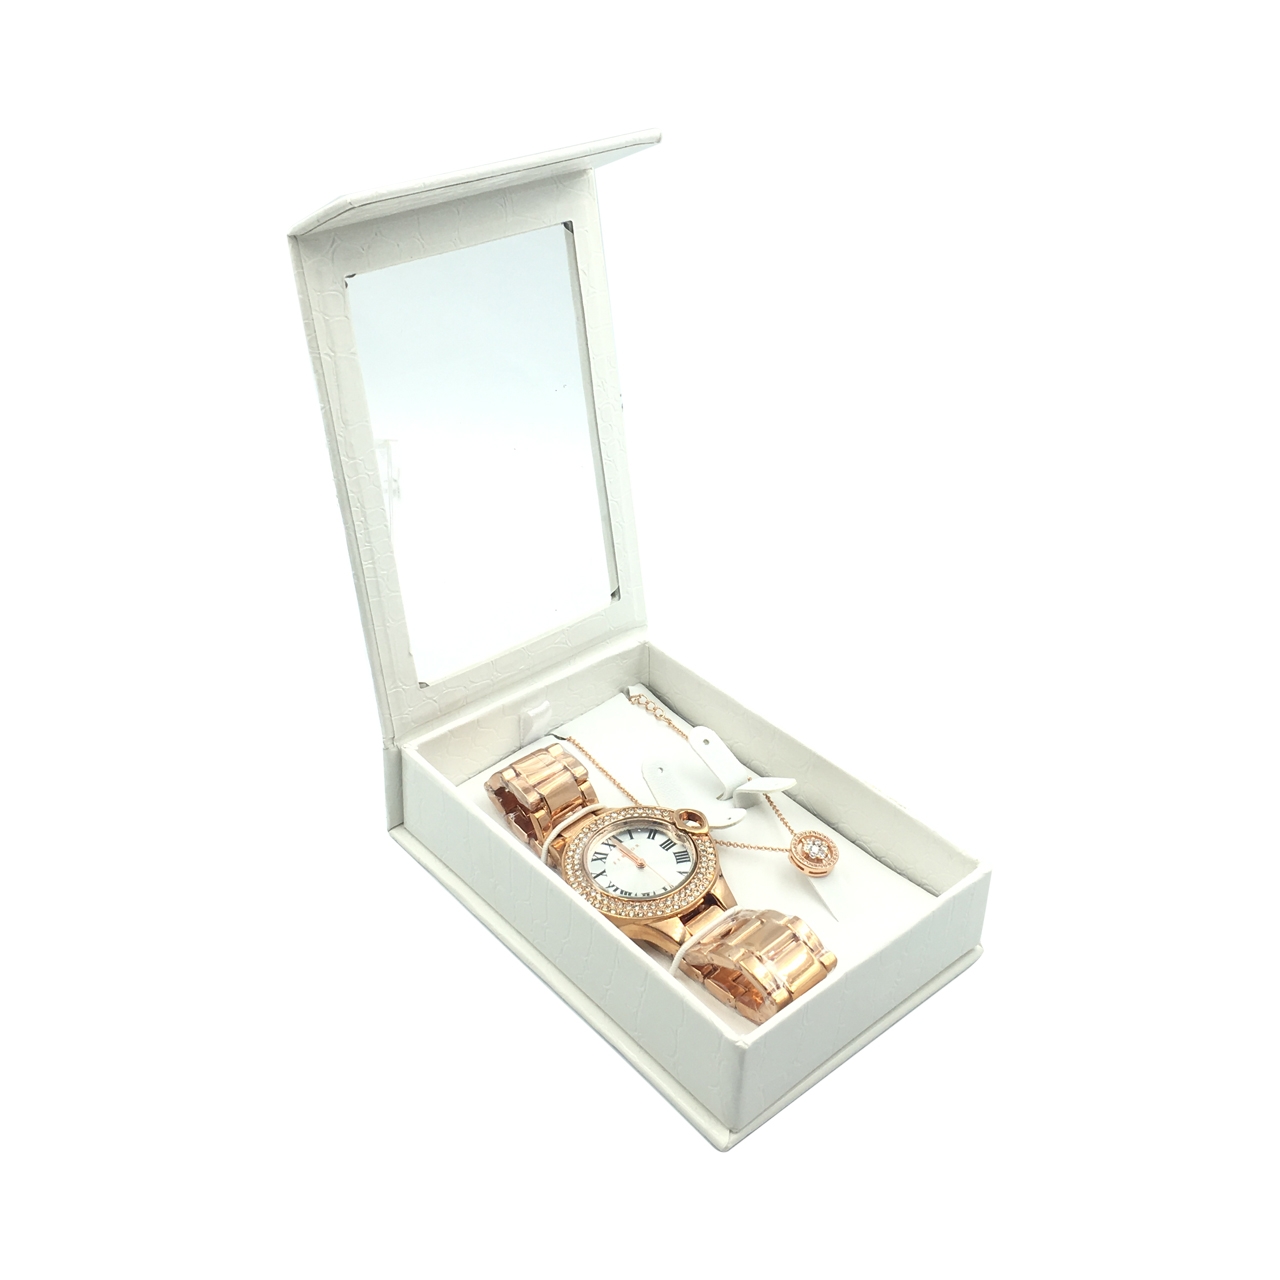 Forvor Montreal Rose Gold Jewellery And Watch